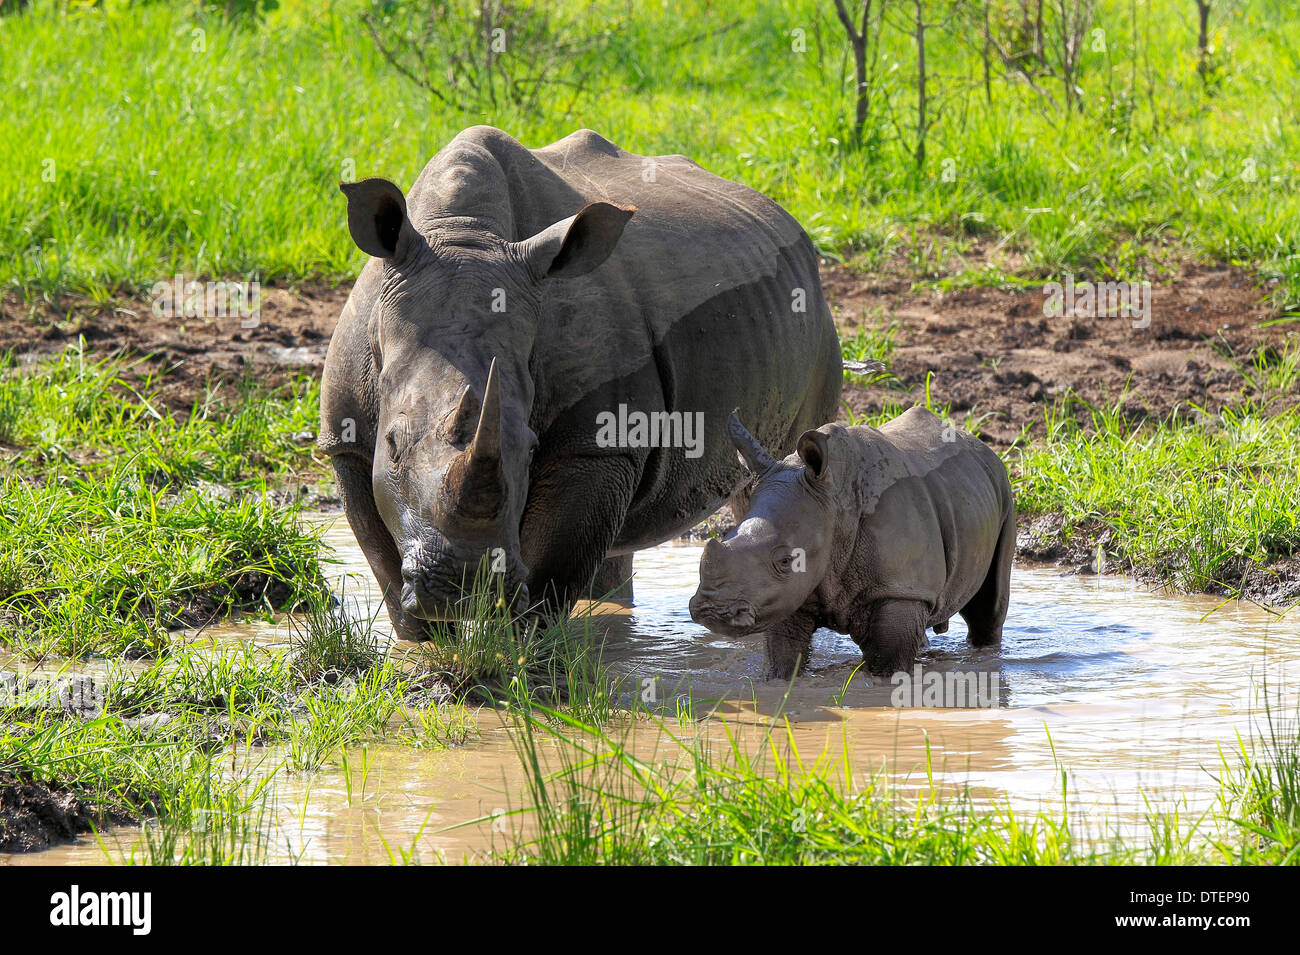 Wide-mouthed Rhinoceros, female with young, Sabi Sabi Game Reserve, Kruger national park, South Africa / (Ceratotherium simum) Stock Photo